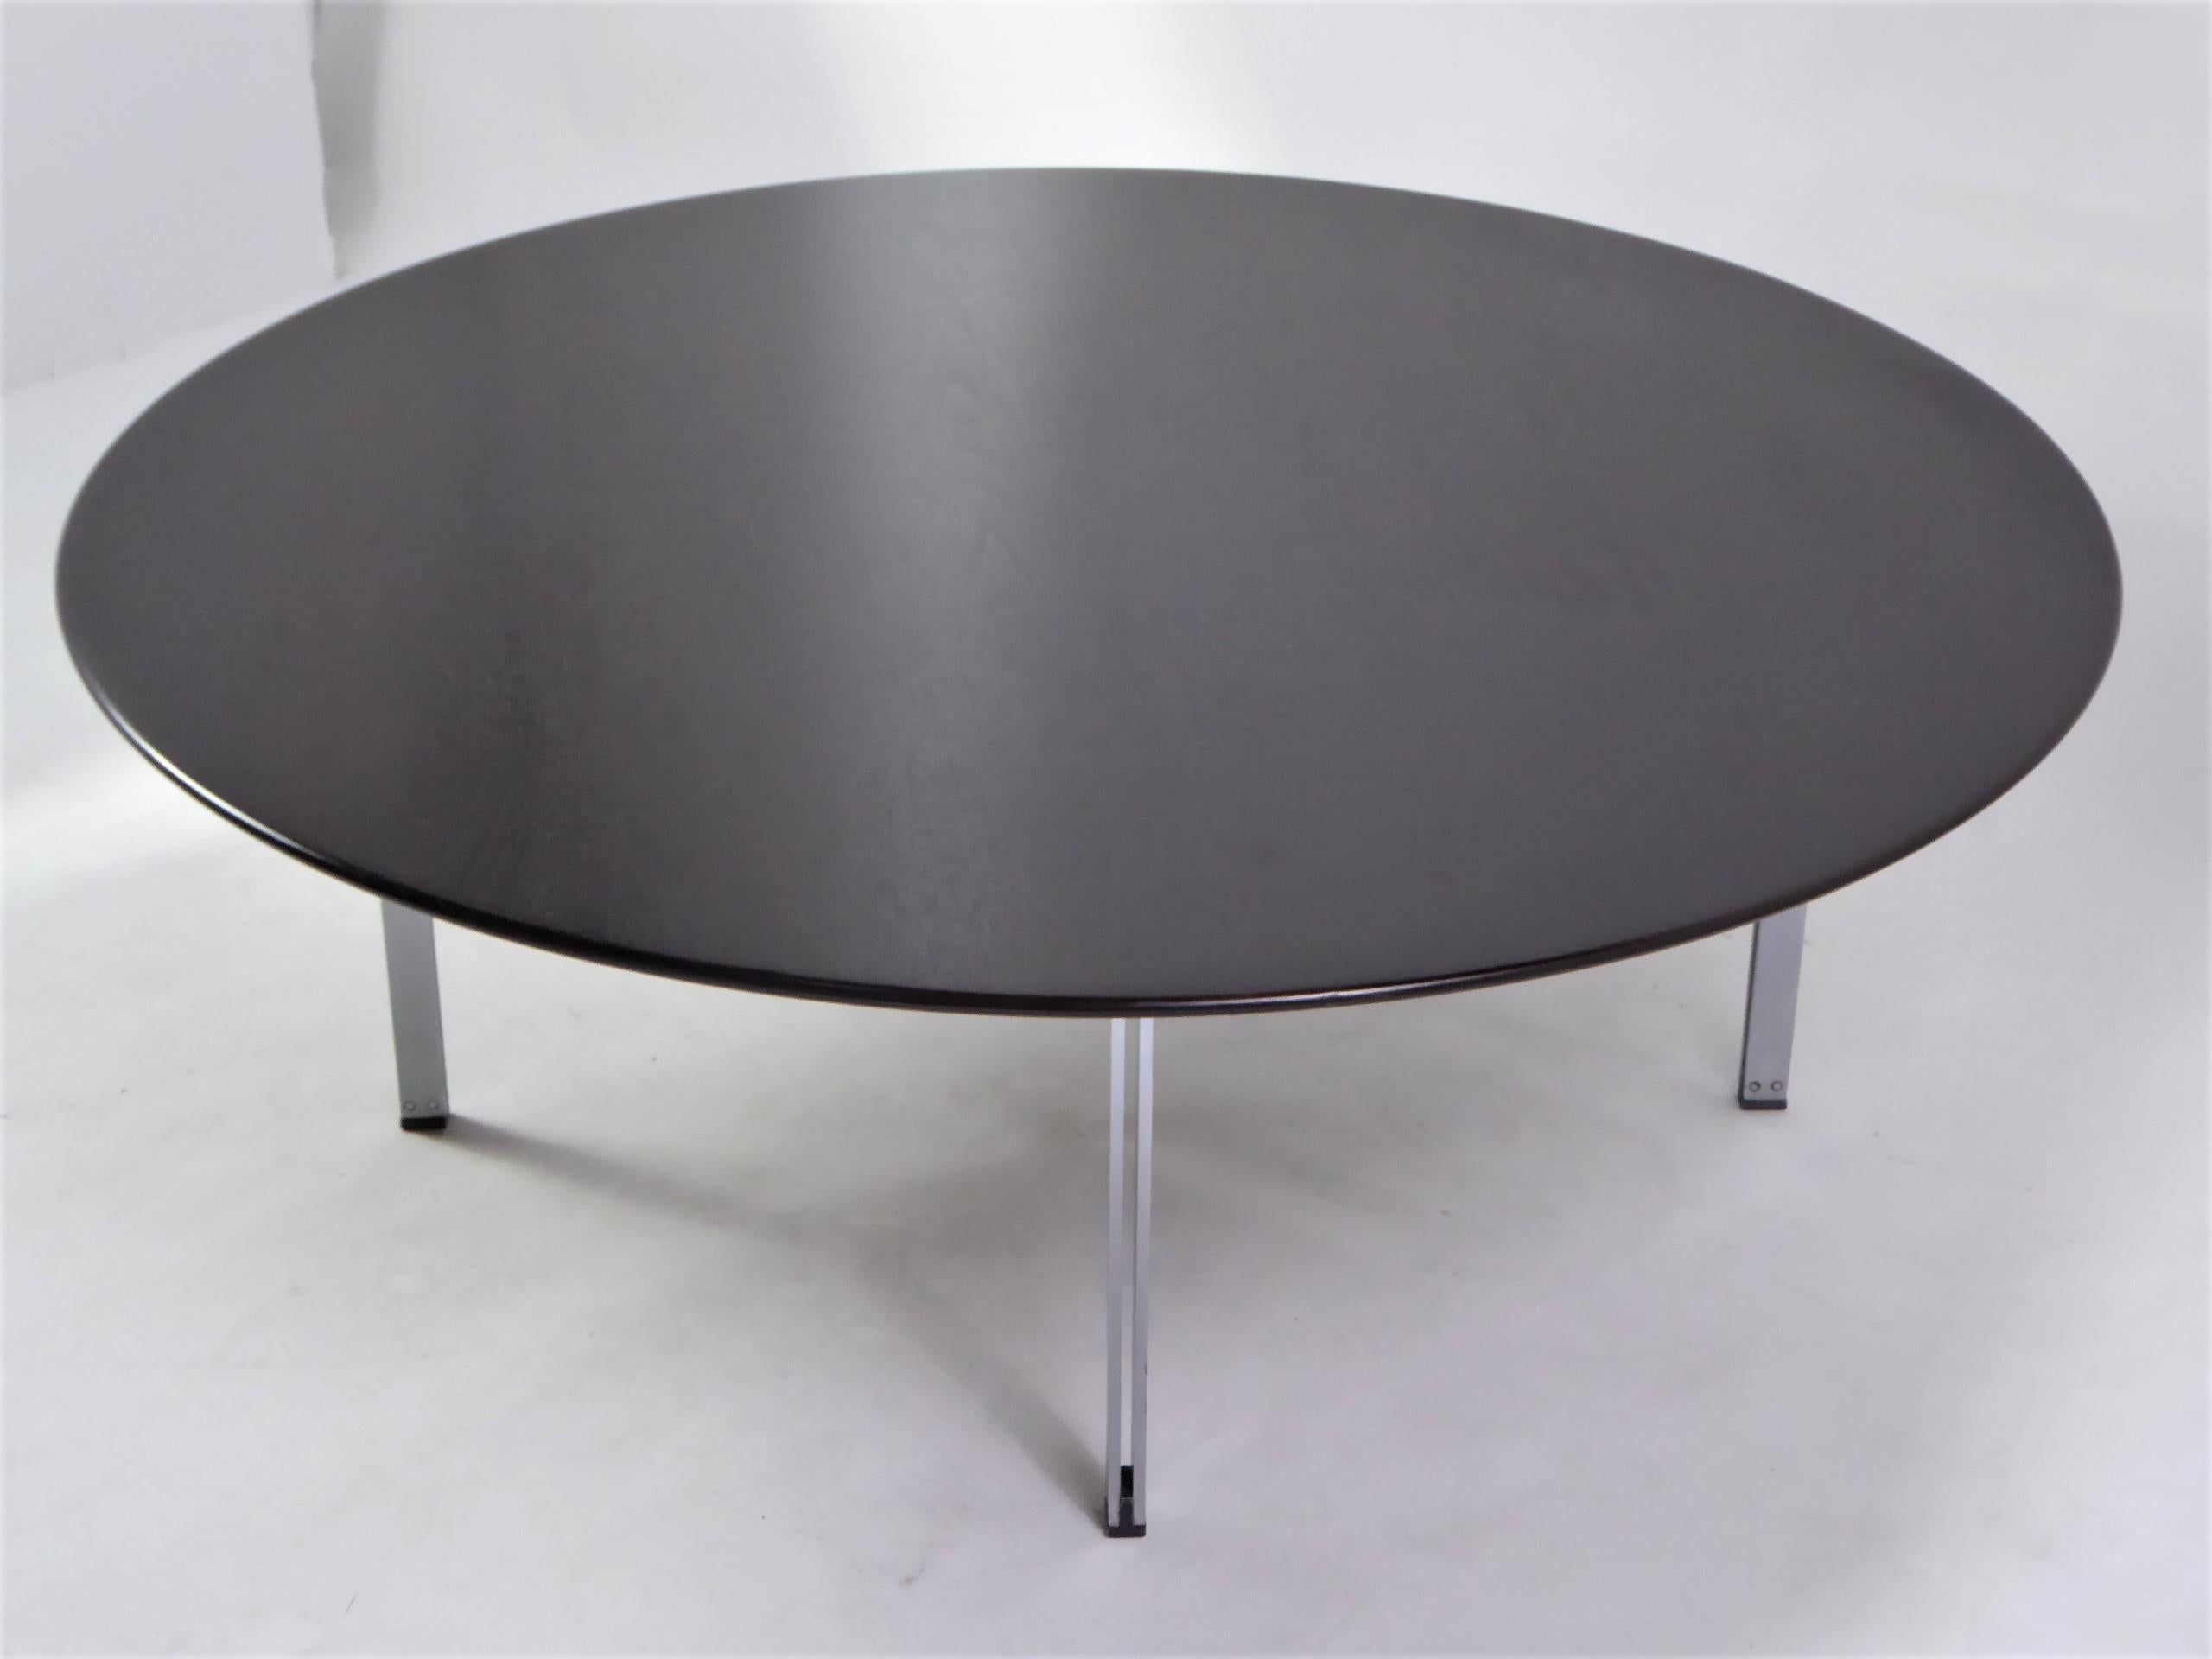 REDUCED FROM $4500....Florence Knoll designed this modern mid century rarely seen circular coffee table for Knoll, part of the Parallel Bar Series, produced from 1955-1968, model 404 . It has an ebonized walnut top with an knife edge, an inward